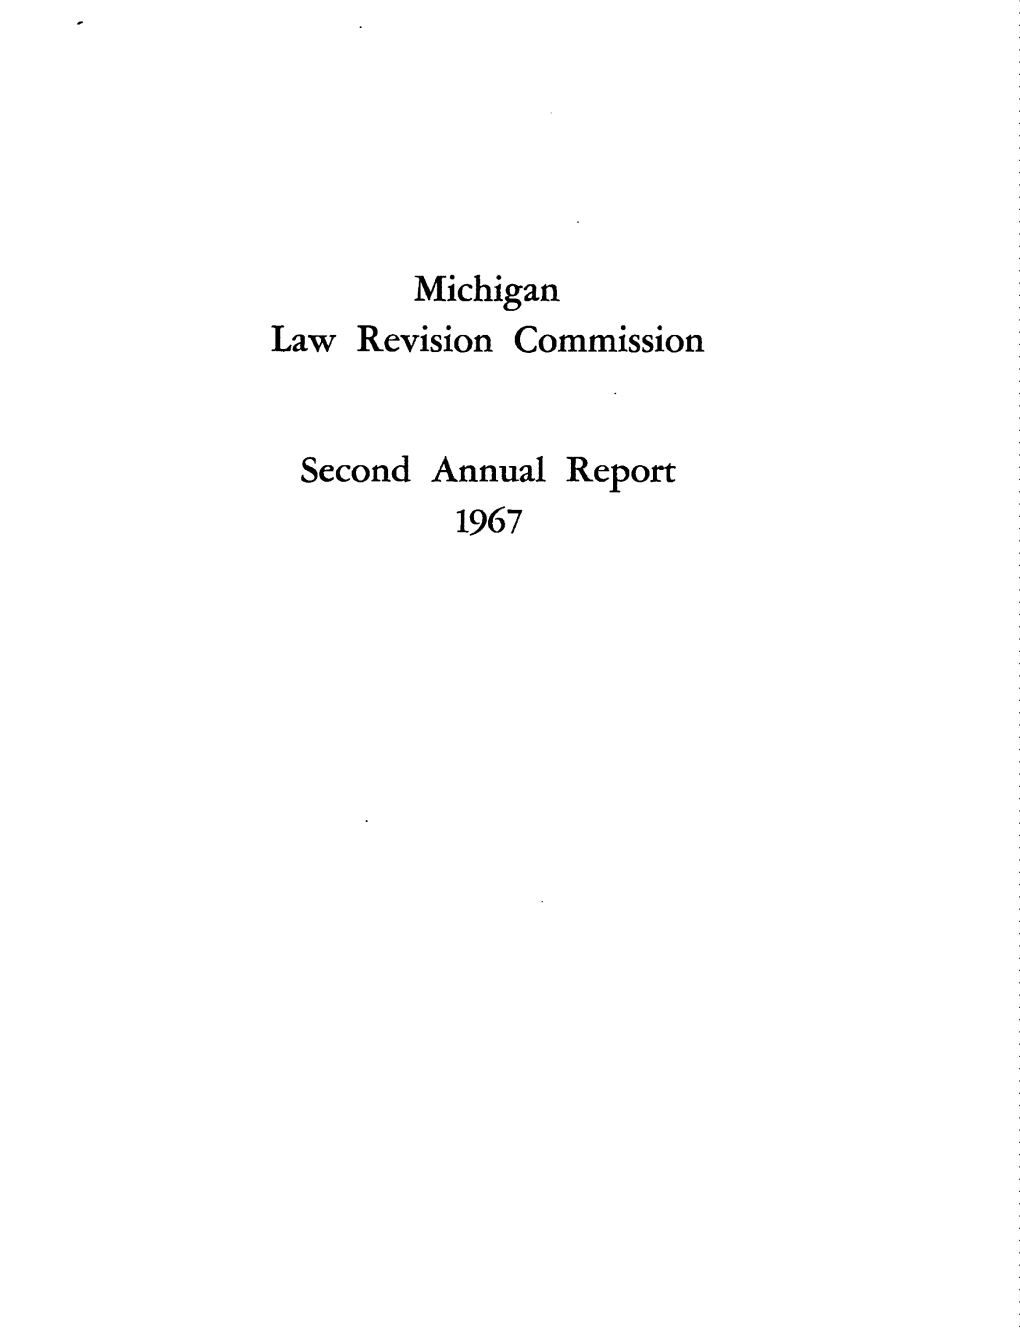 1967 Second Annual Report